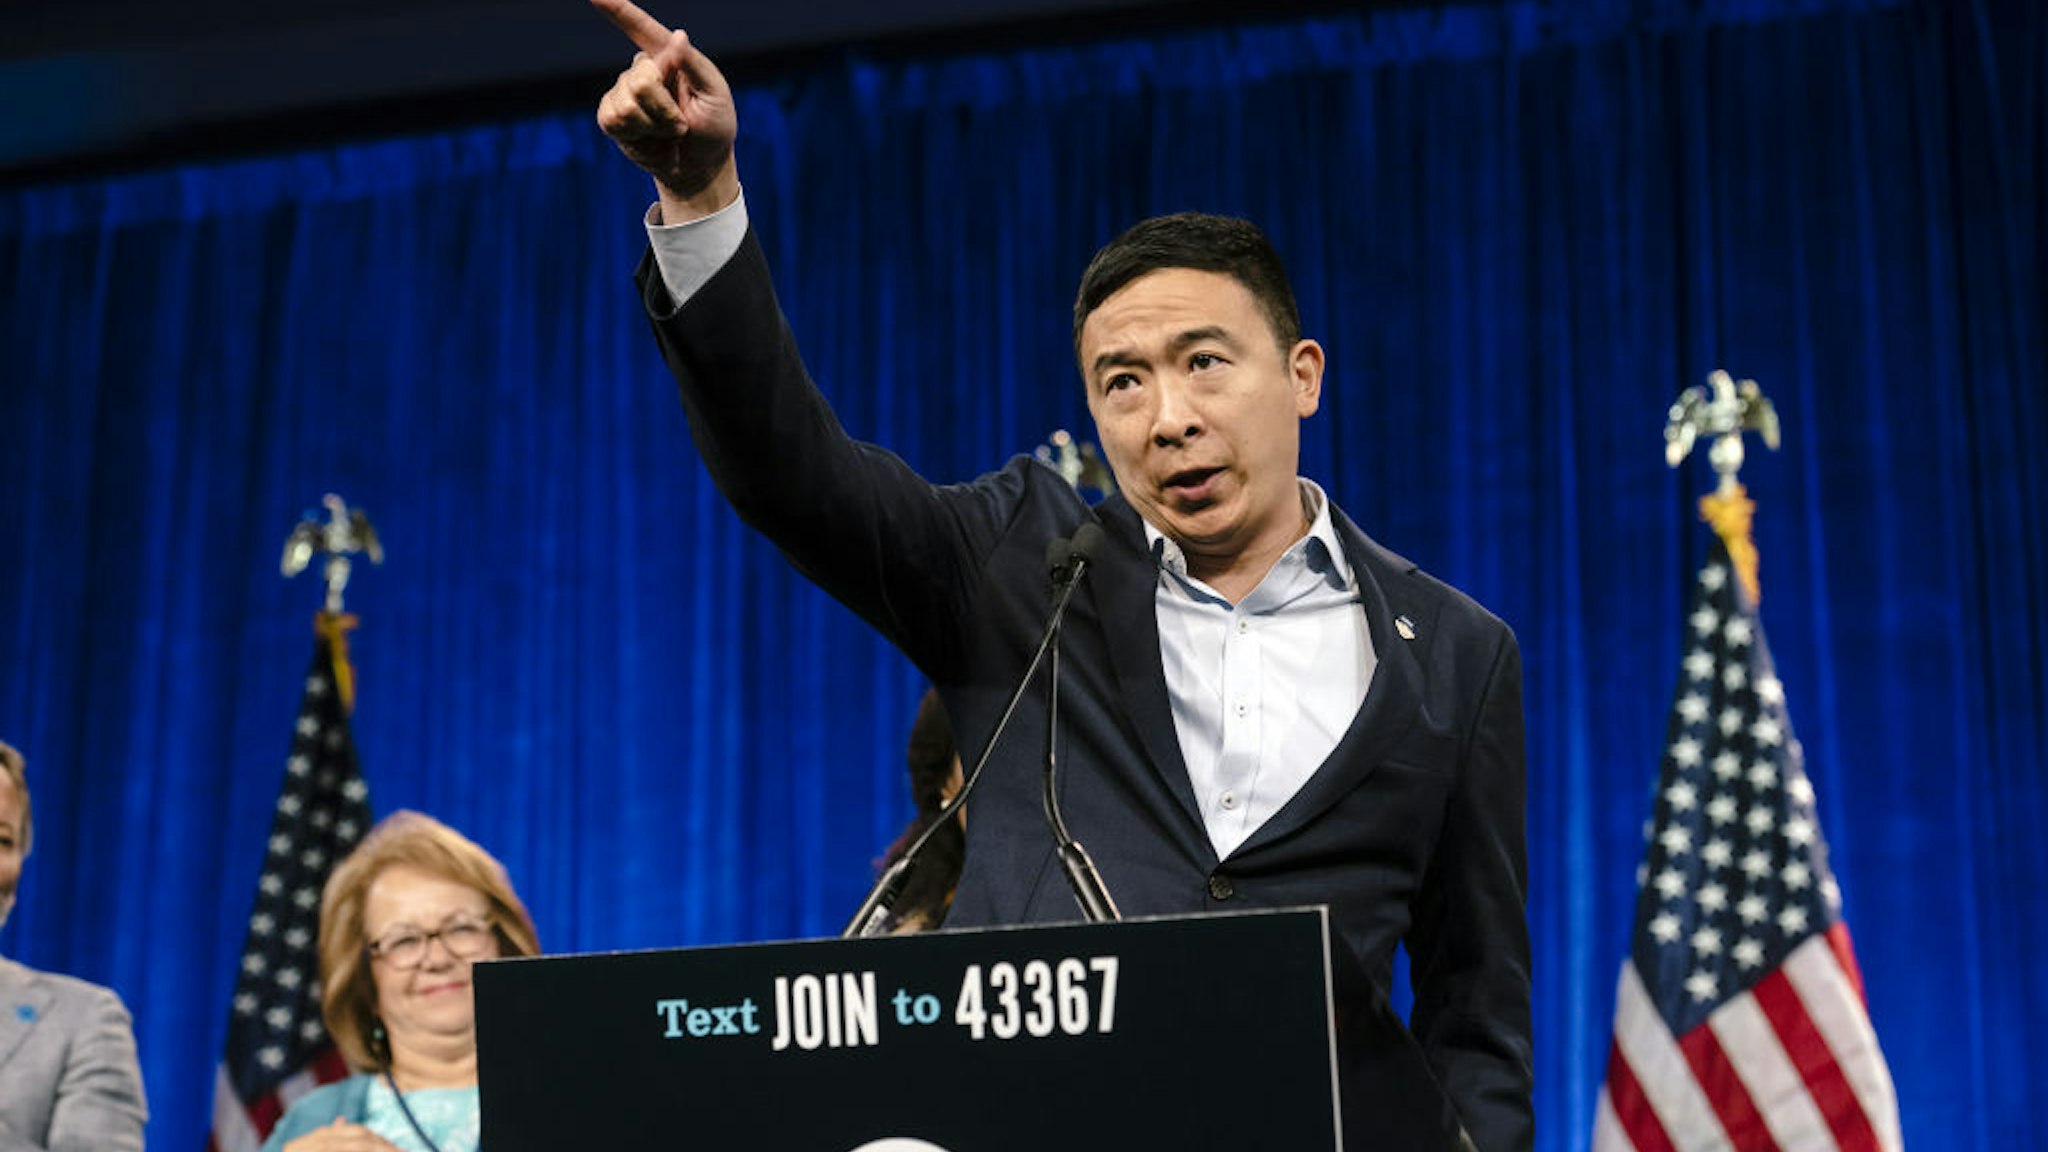 Andrew Yang, founder of Venture for America and 2020 Democratic presidential candidate, gestures while speaking during the Democratic National Committee (DNC) Summer Meeting in San Francisco, California, U.S., on Friday, Aug. 23, 2019.